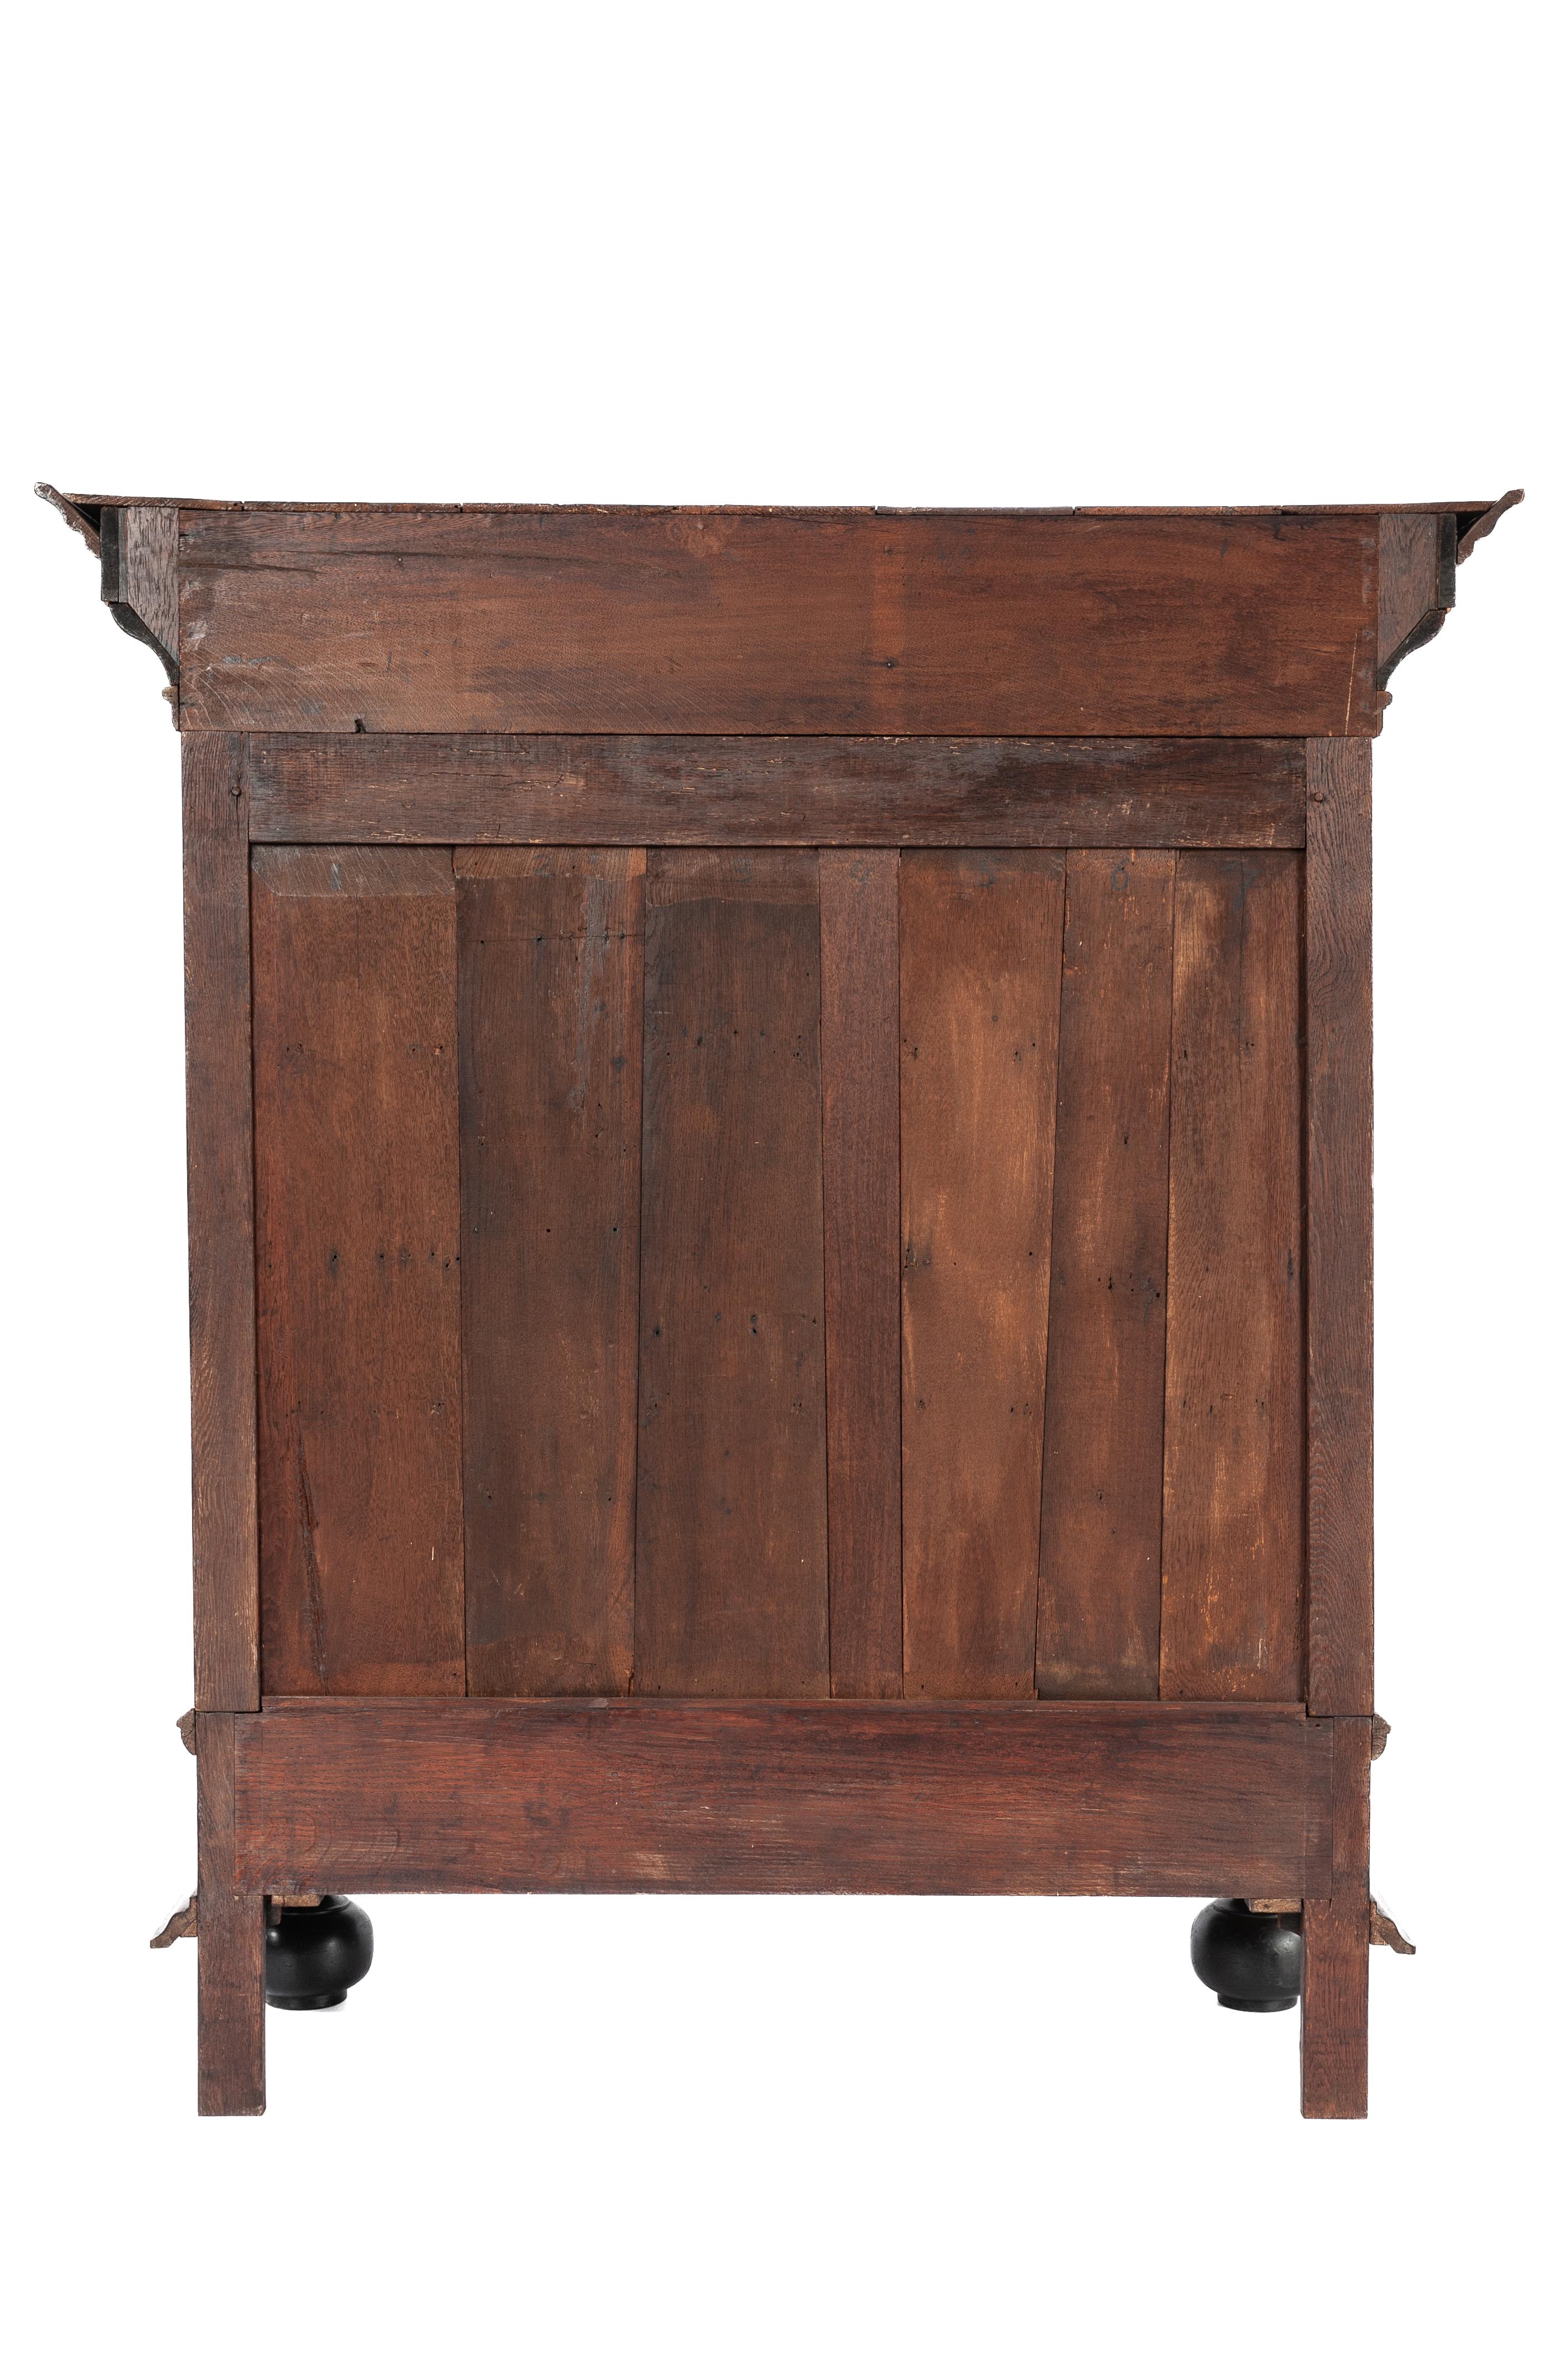 17th Century Antique 17th century Dutch Renaissance two-door warm brown and black cupboard For Sale